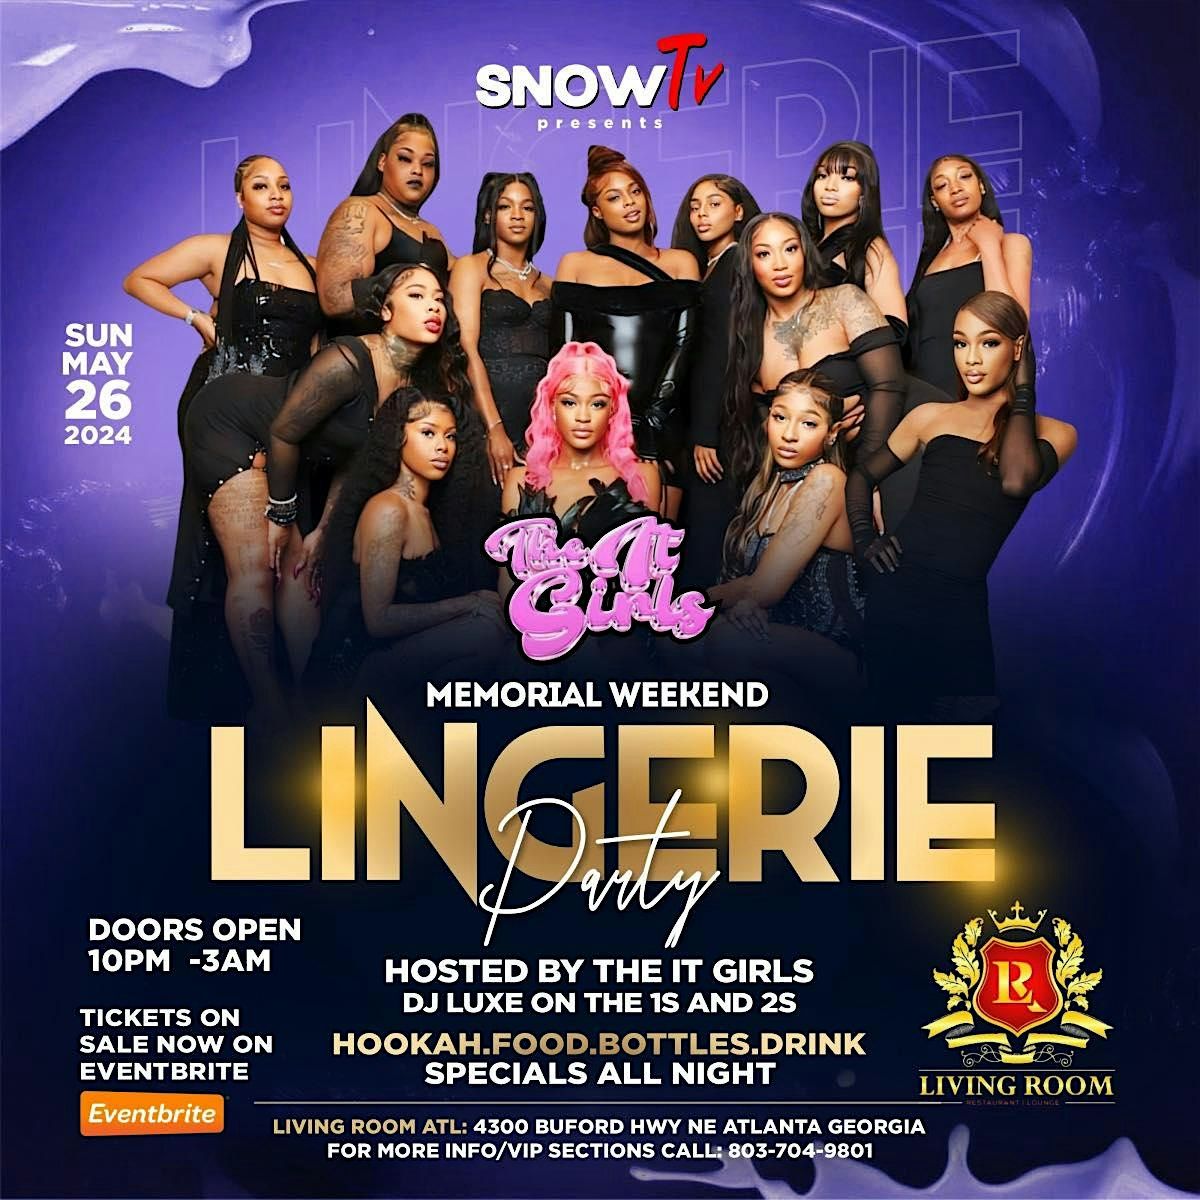 The IT Girls Lingerie party Edition memorial weekend edition